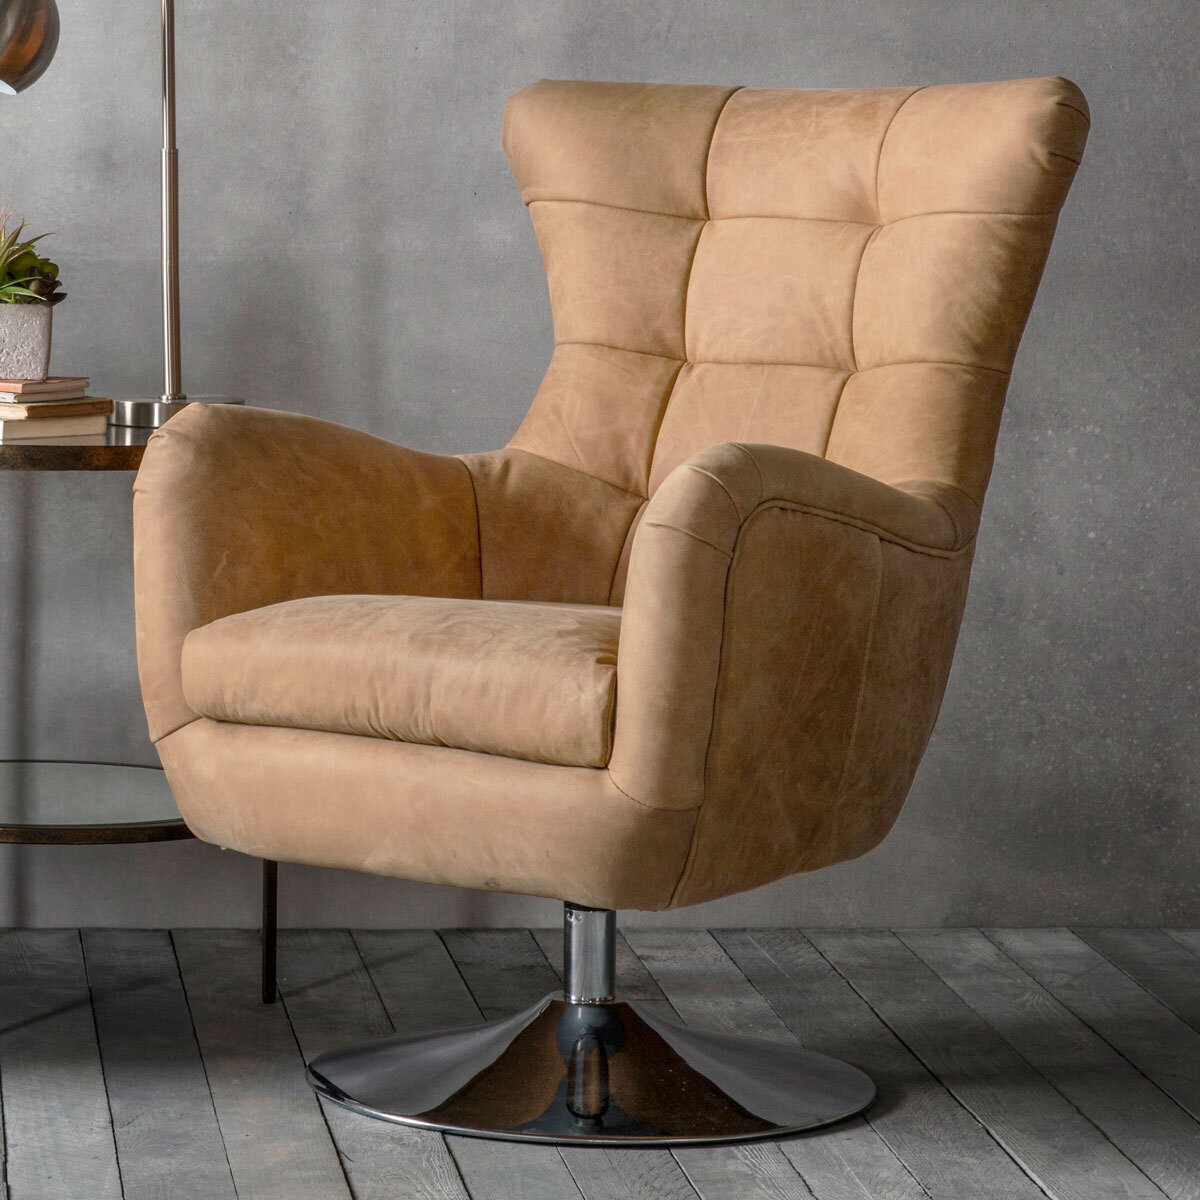 Gallery Newport Top Grain Leather, Swivel Chairs Leather